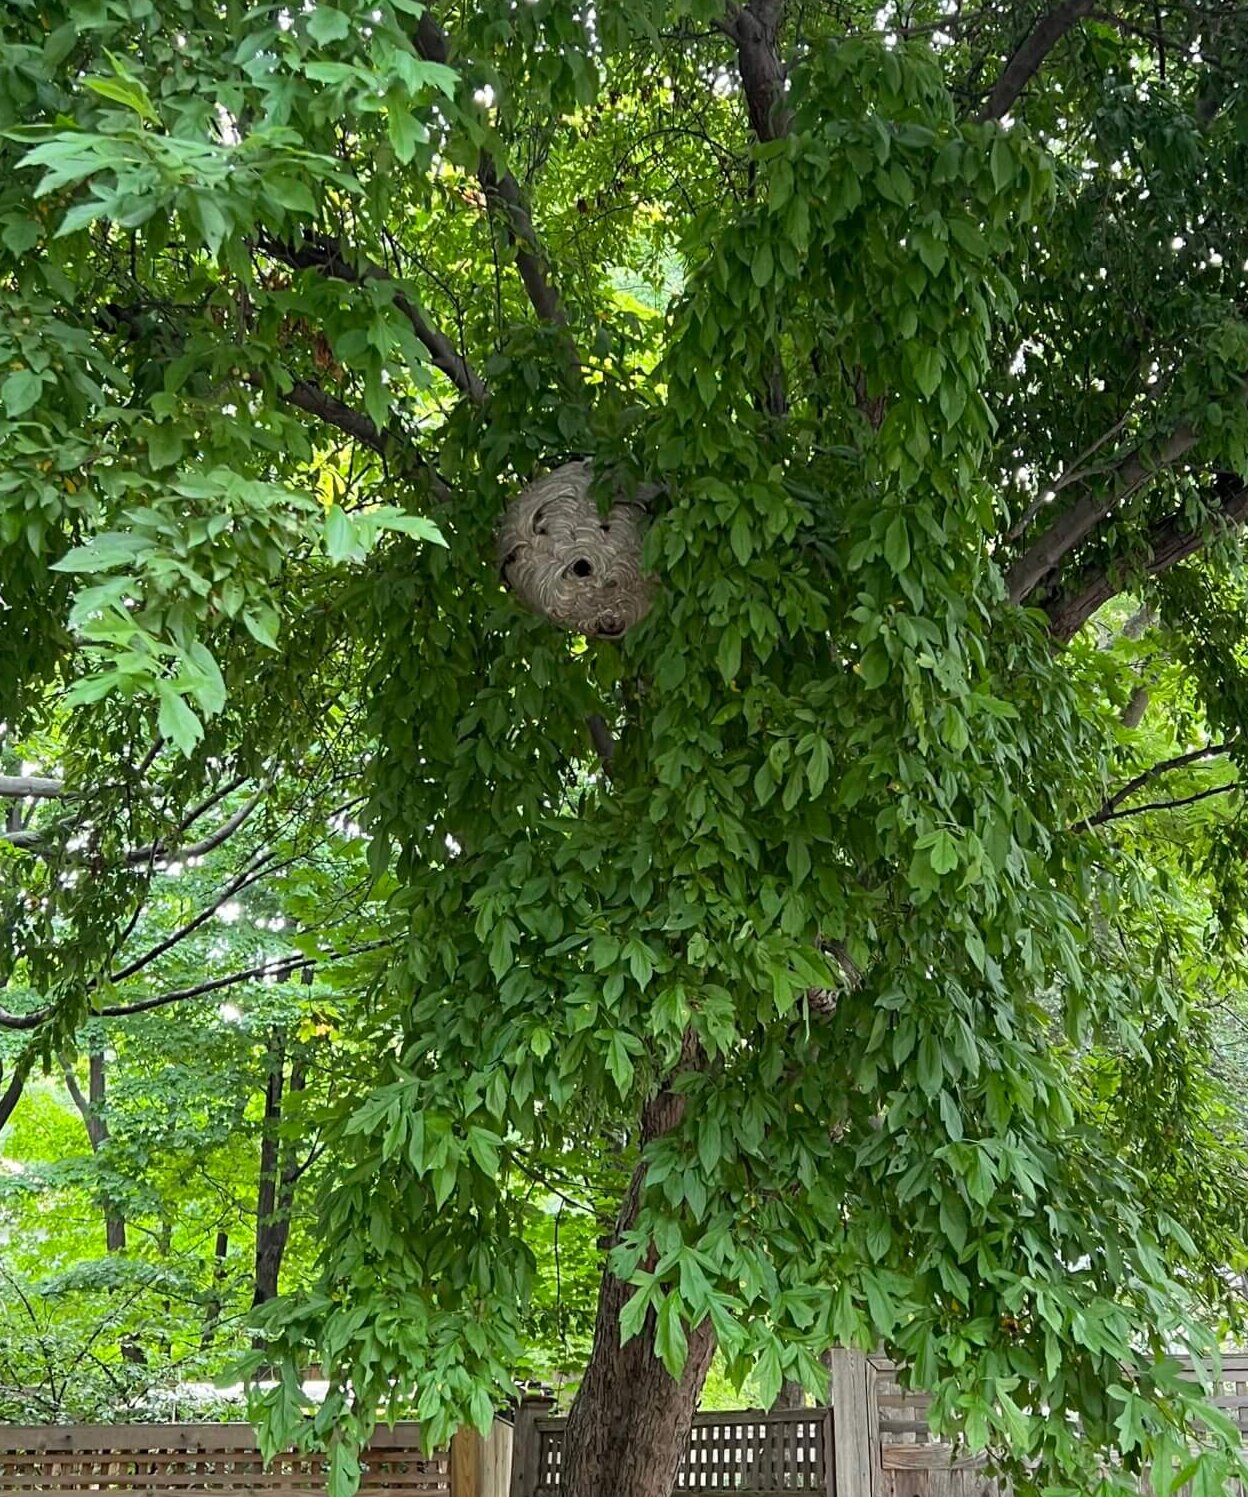 Bald-faced hornet nest hanging from tree